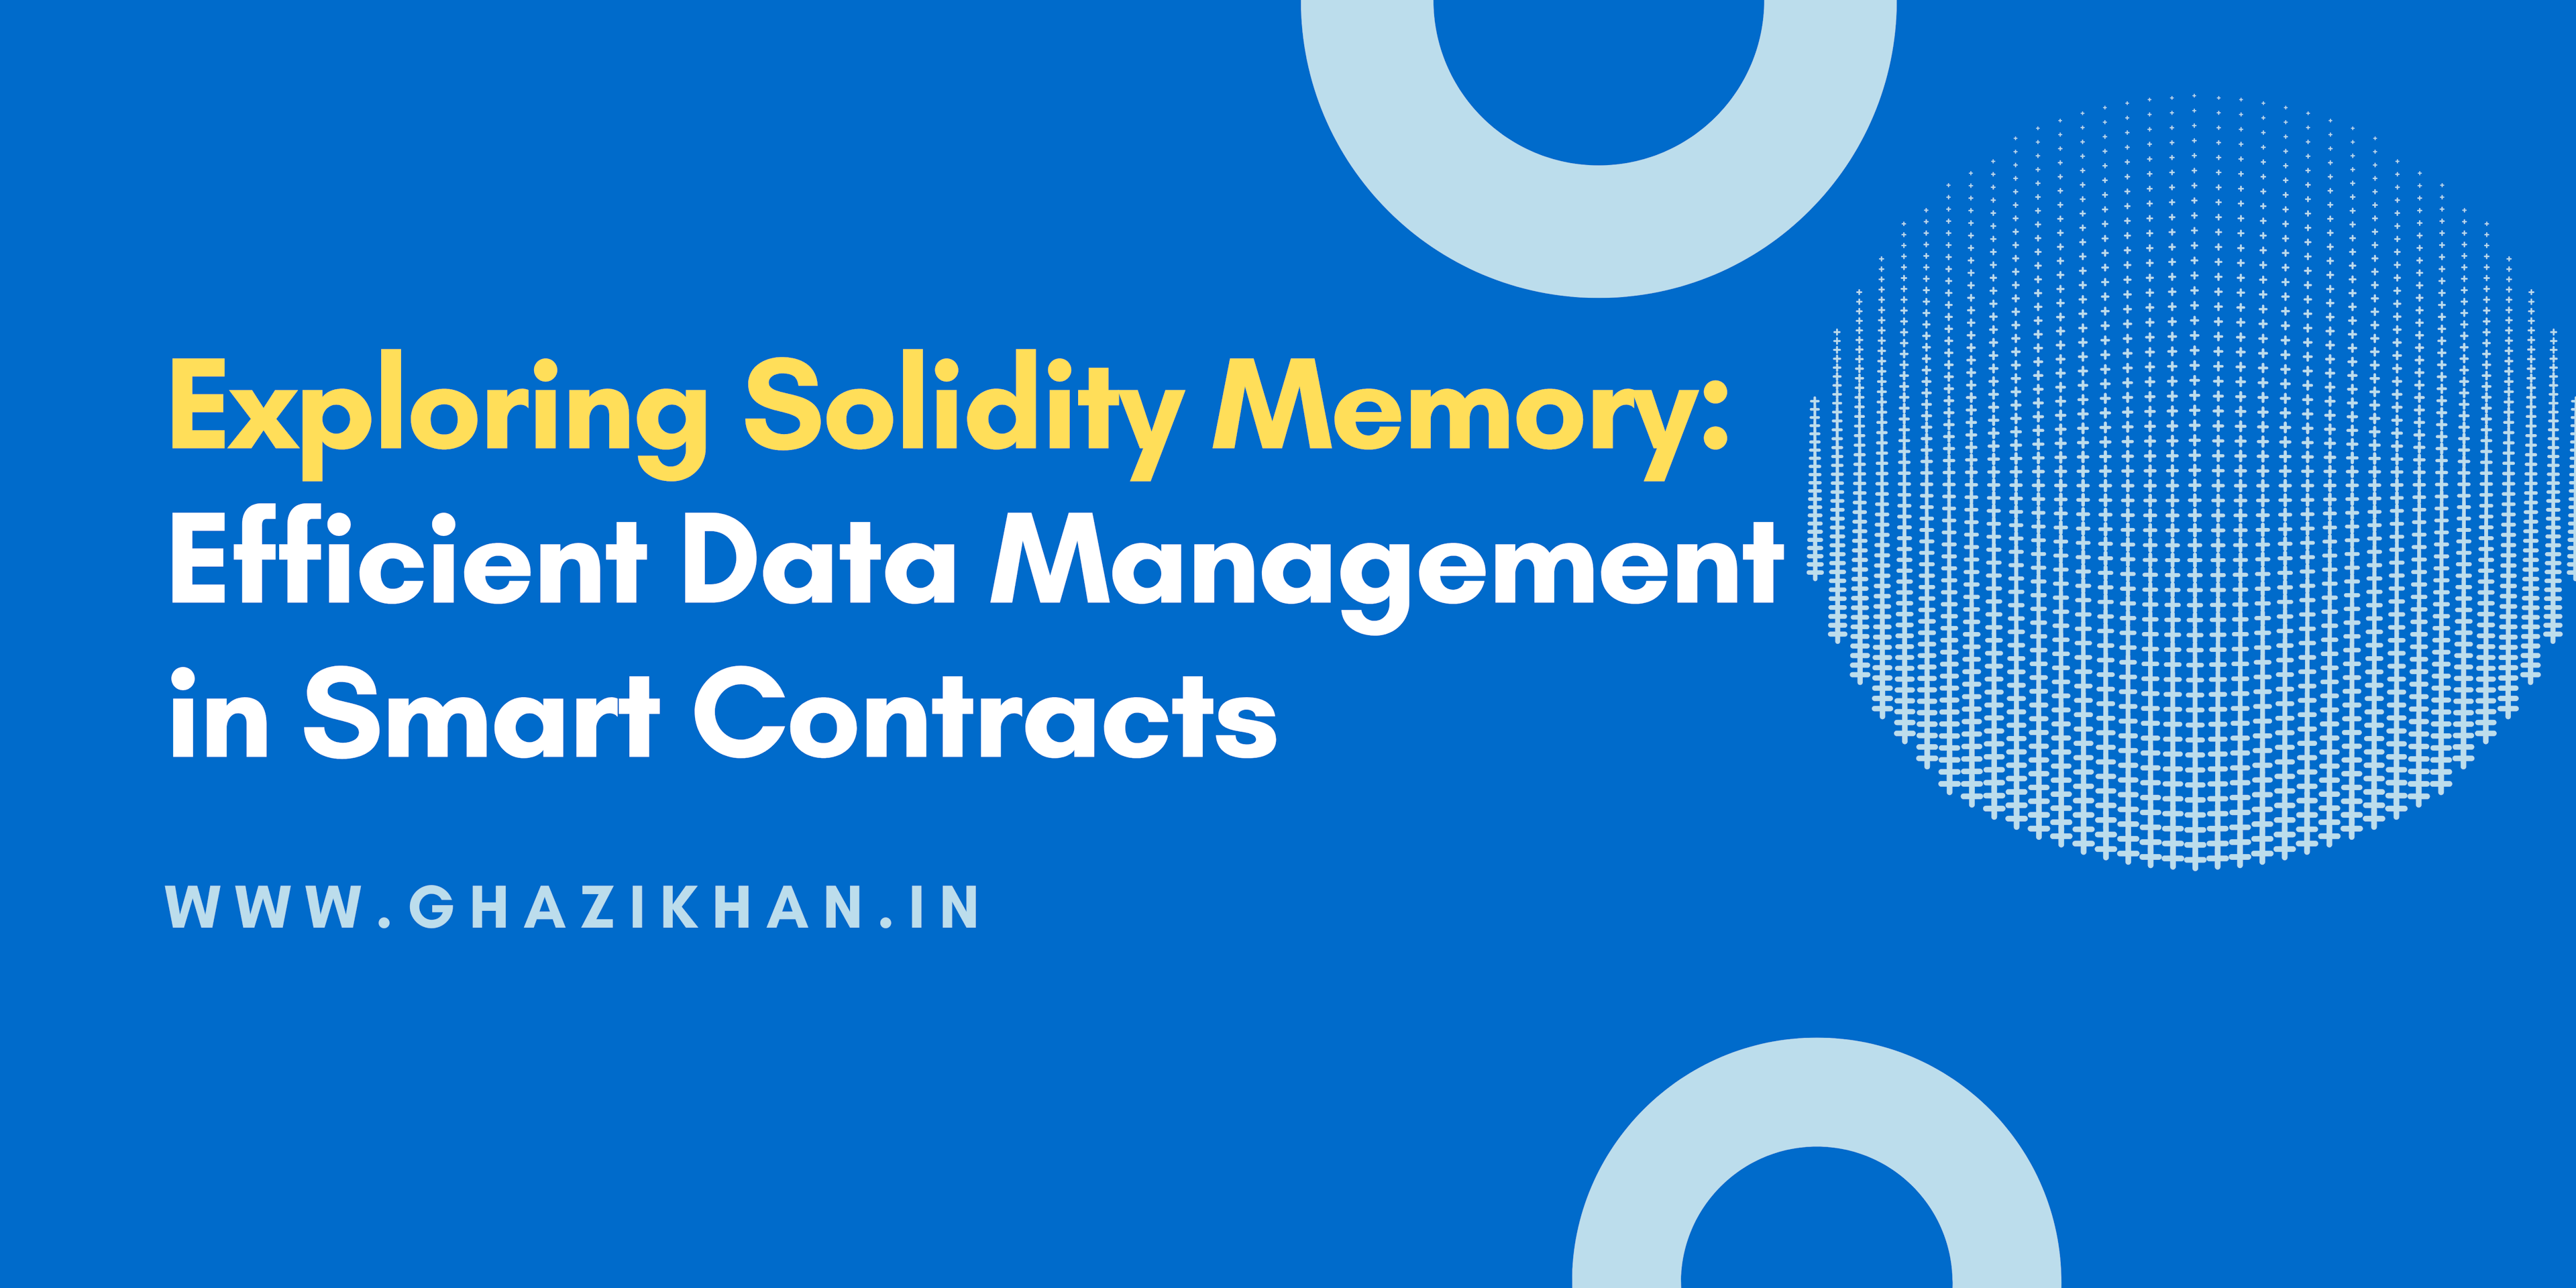 Exploring Solidity Memory: Efficient Data Management in Smart Contracts